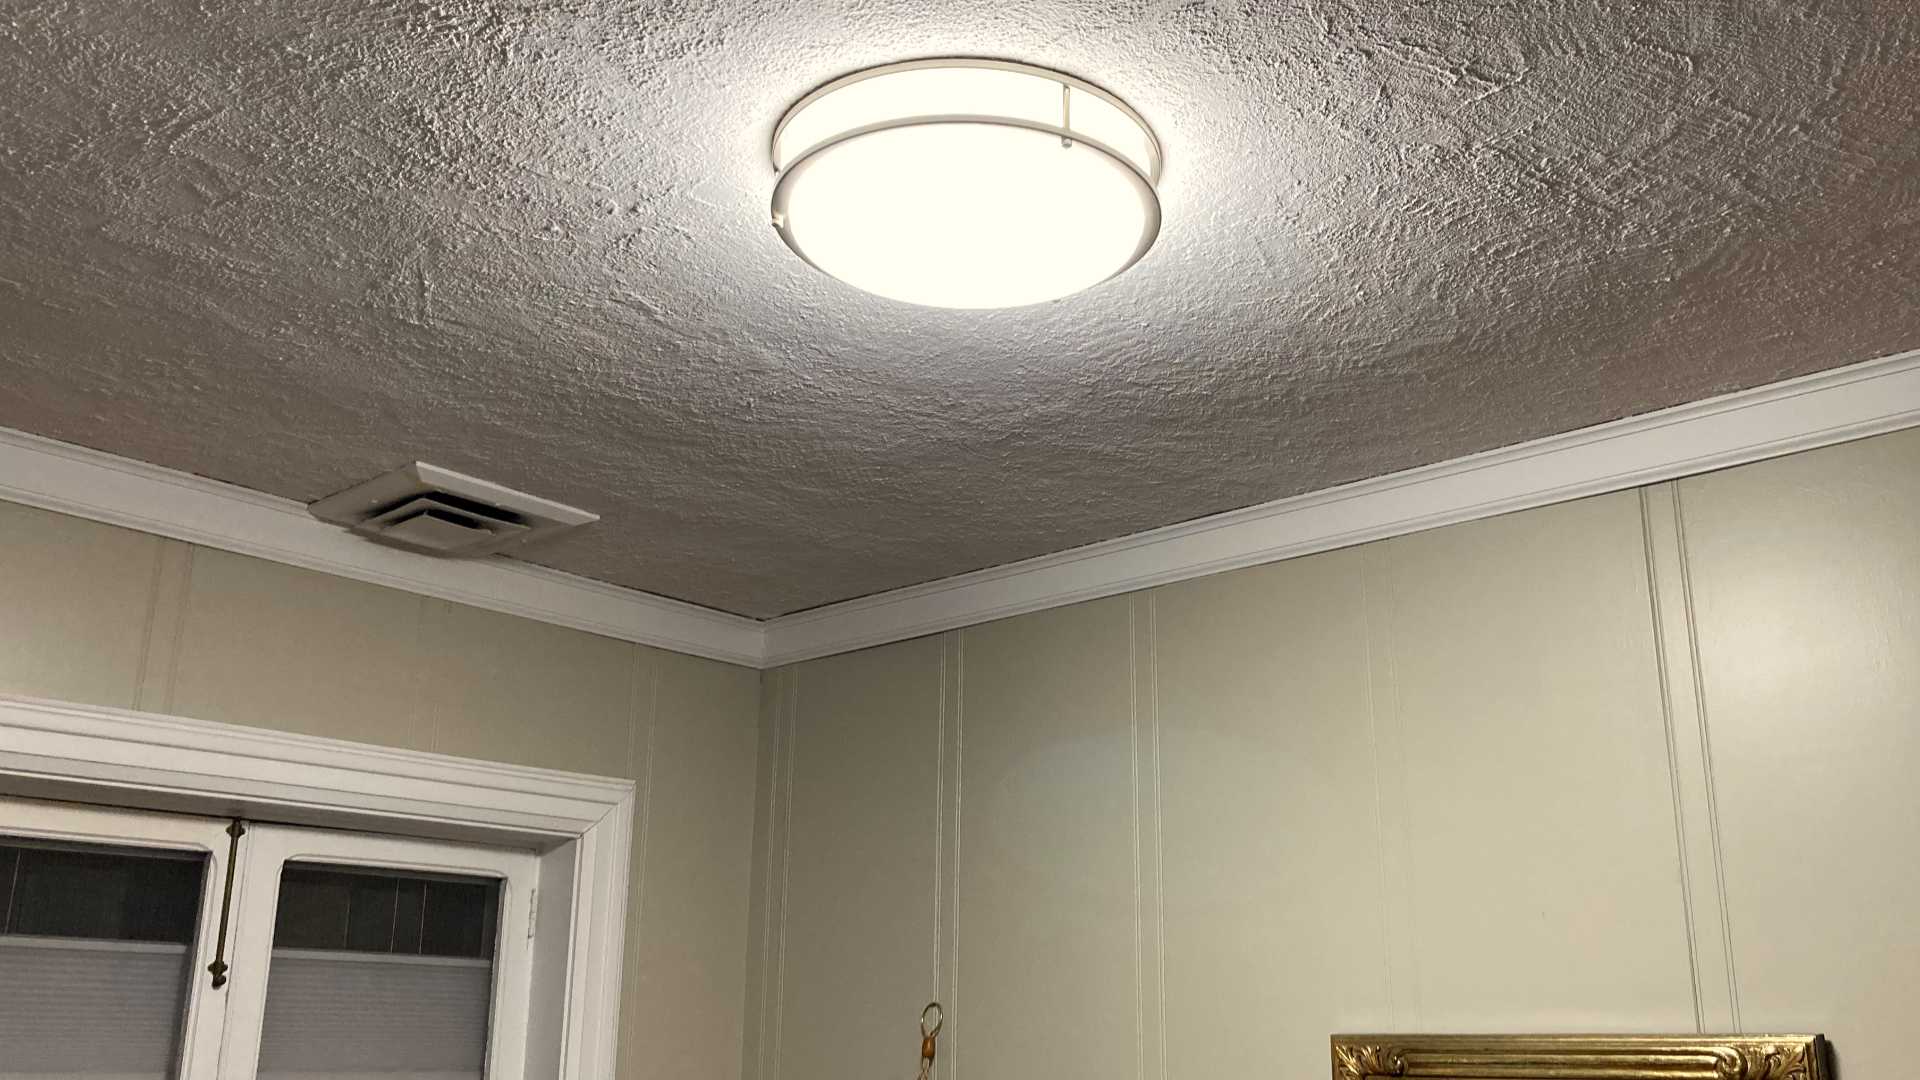 A new light fixture brightened up this multiuse room quite a bit!